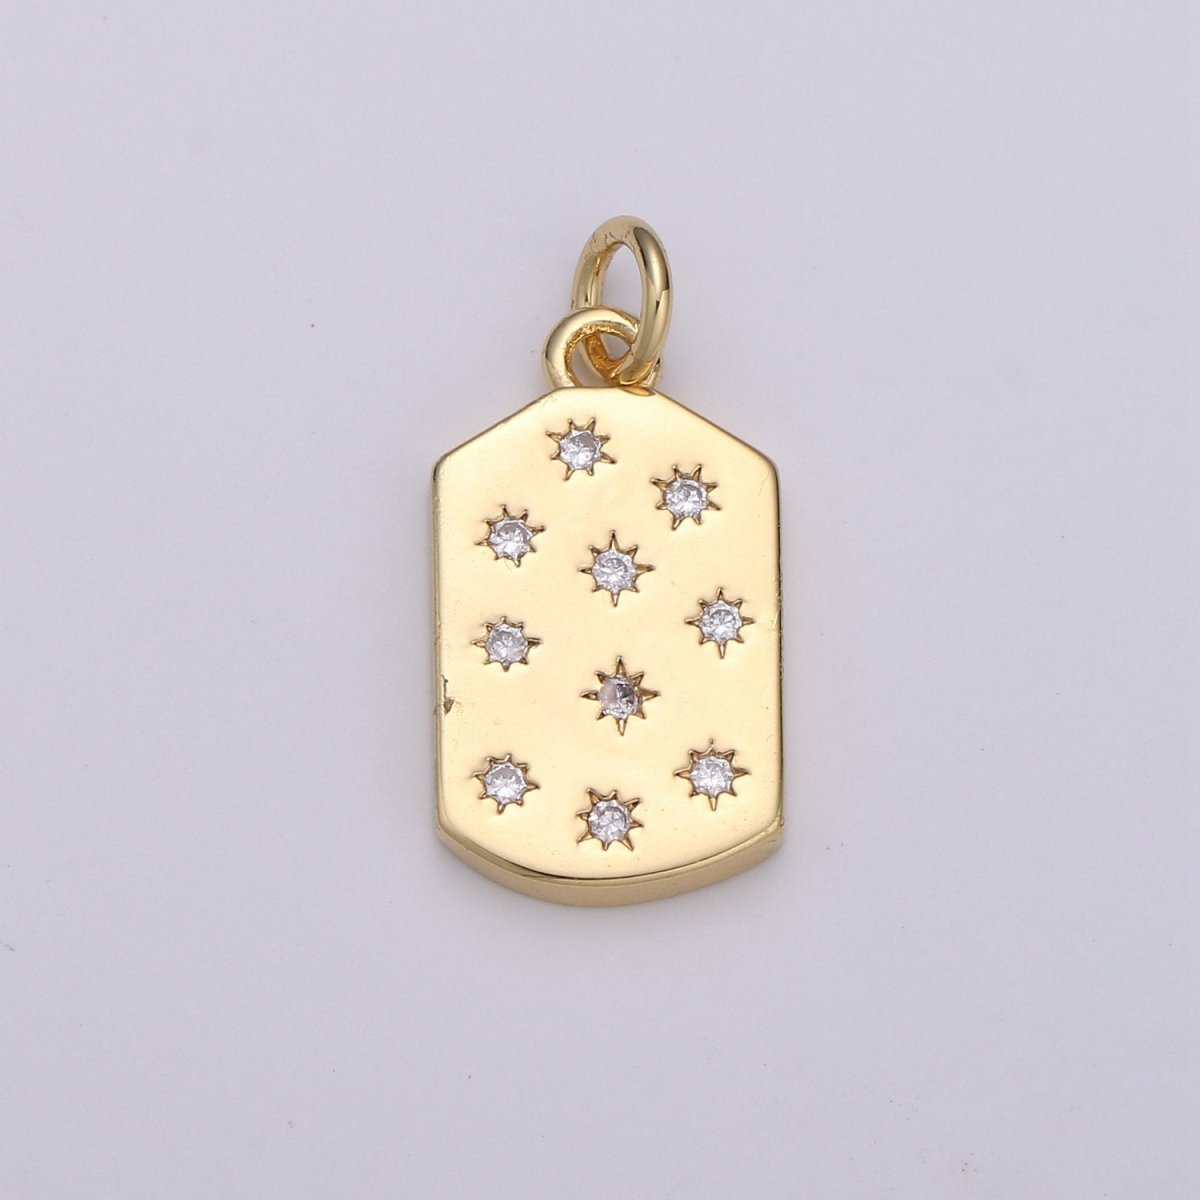 Micro Pave Star Pendant Dainty Star Charm Gold Celestial Dog Tag Charm Military Tag Jewelry Making Supply 24K Gold Filled Findings D-532 - DLUXCA